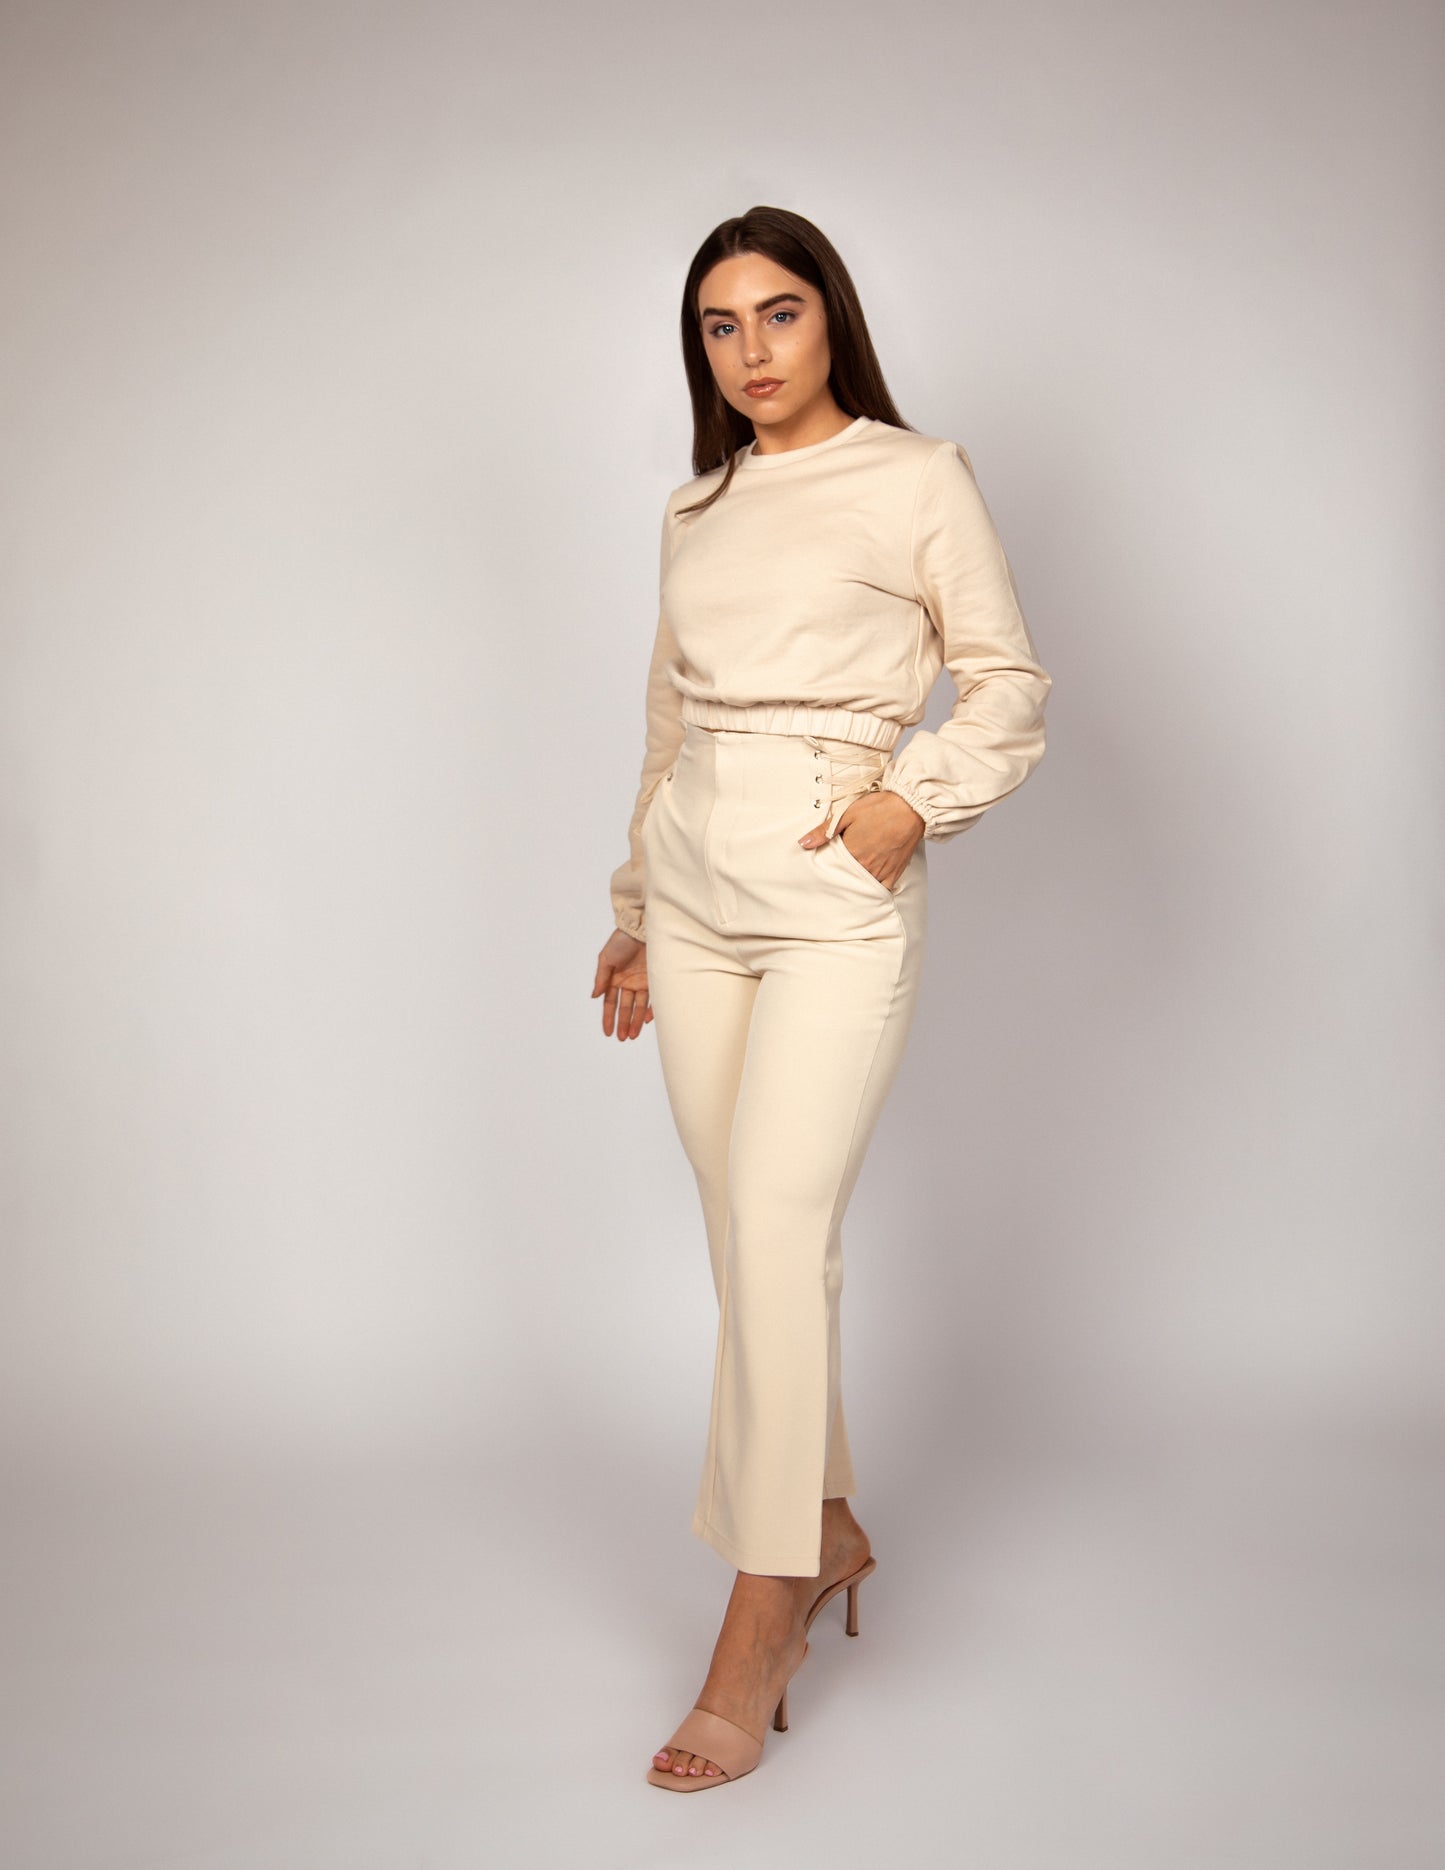 Woman standing with one hand in pocket wearing high waisted nude trousers with lace up waist detail and nude jumper with balloon sleeve and elasticated hem.